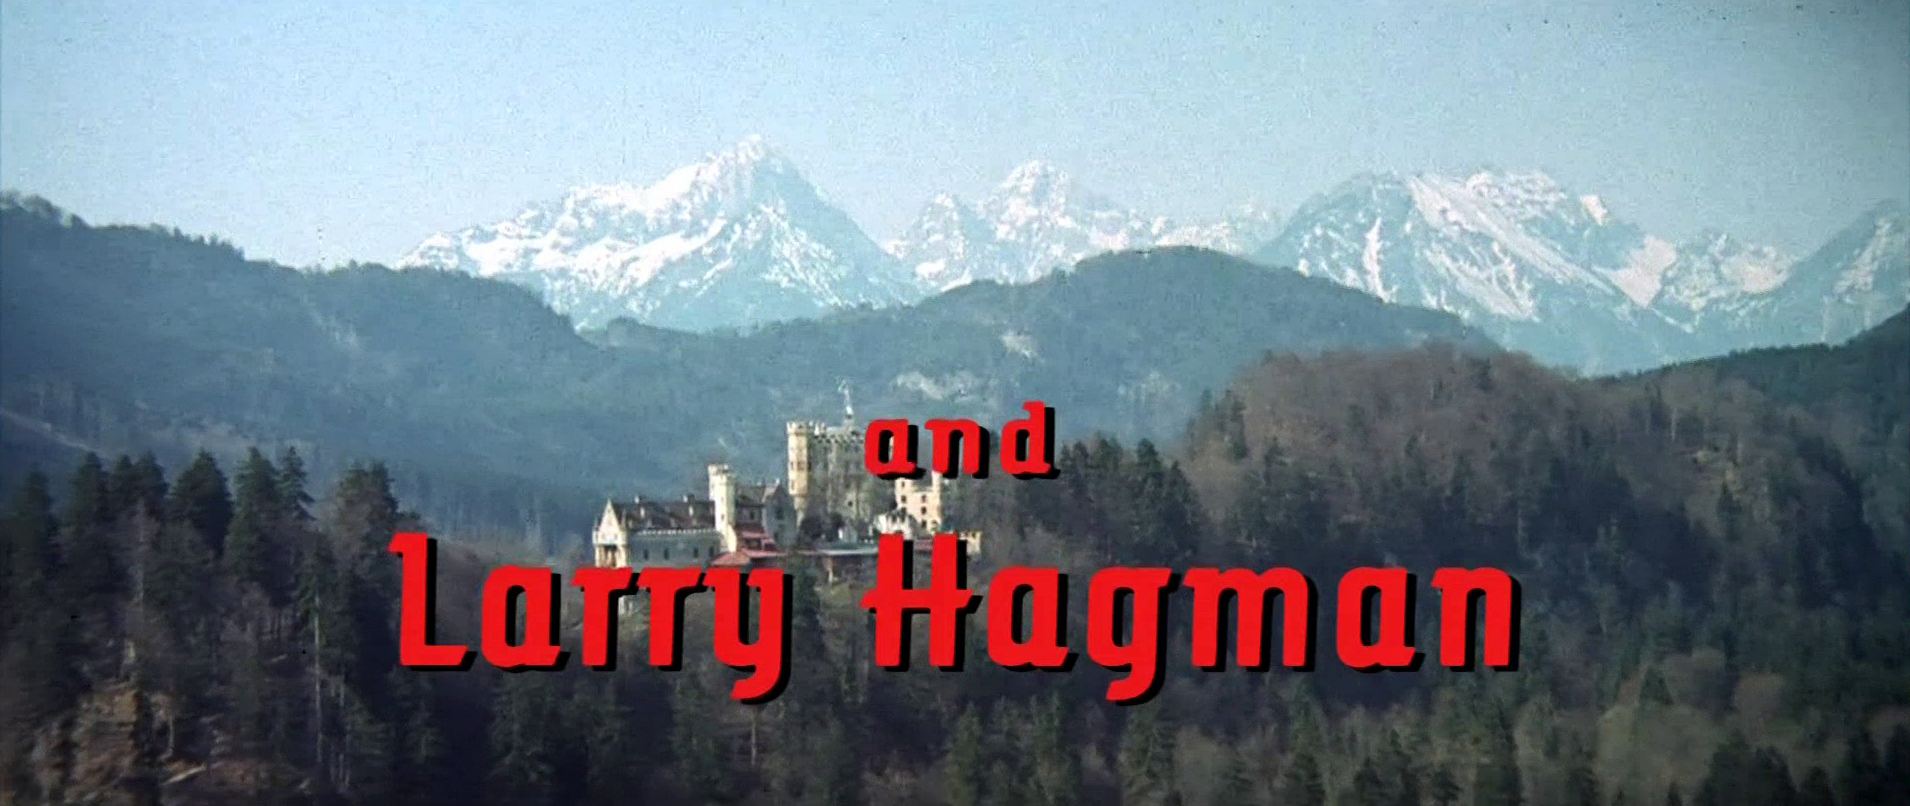 Main title from The Eagle Has Landed (1976) (12). And Larry Hagman